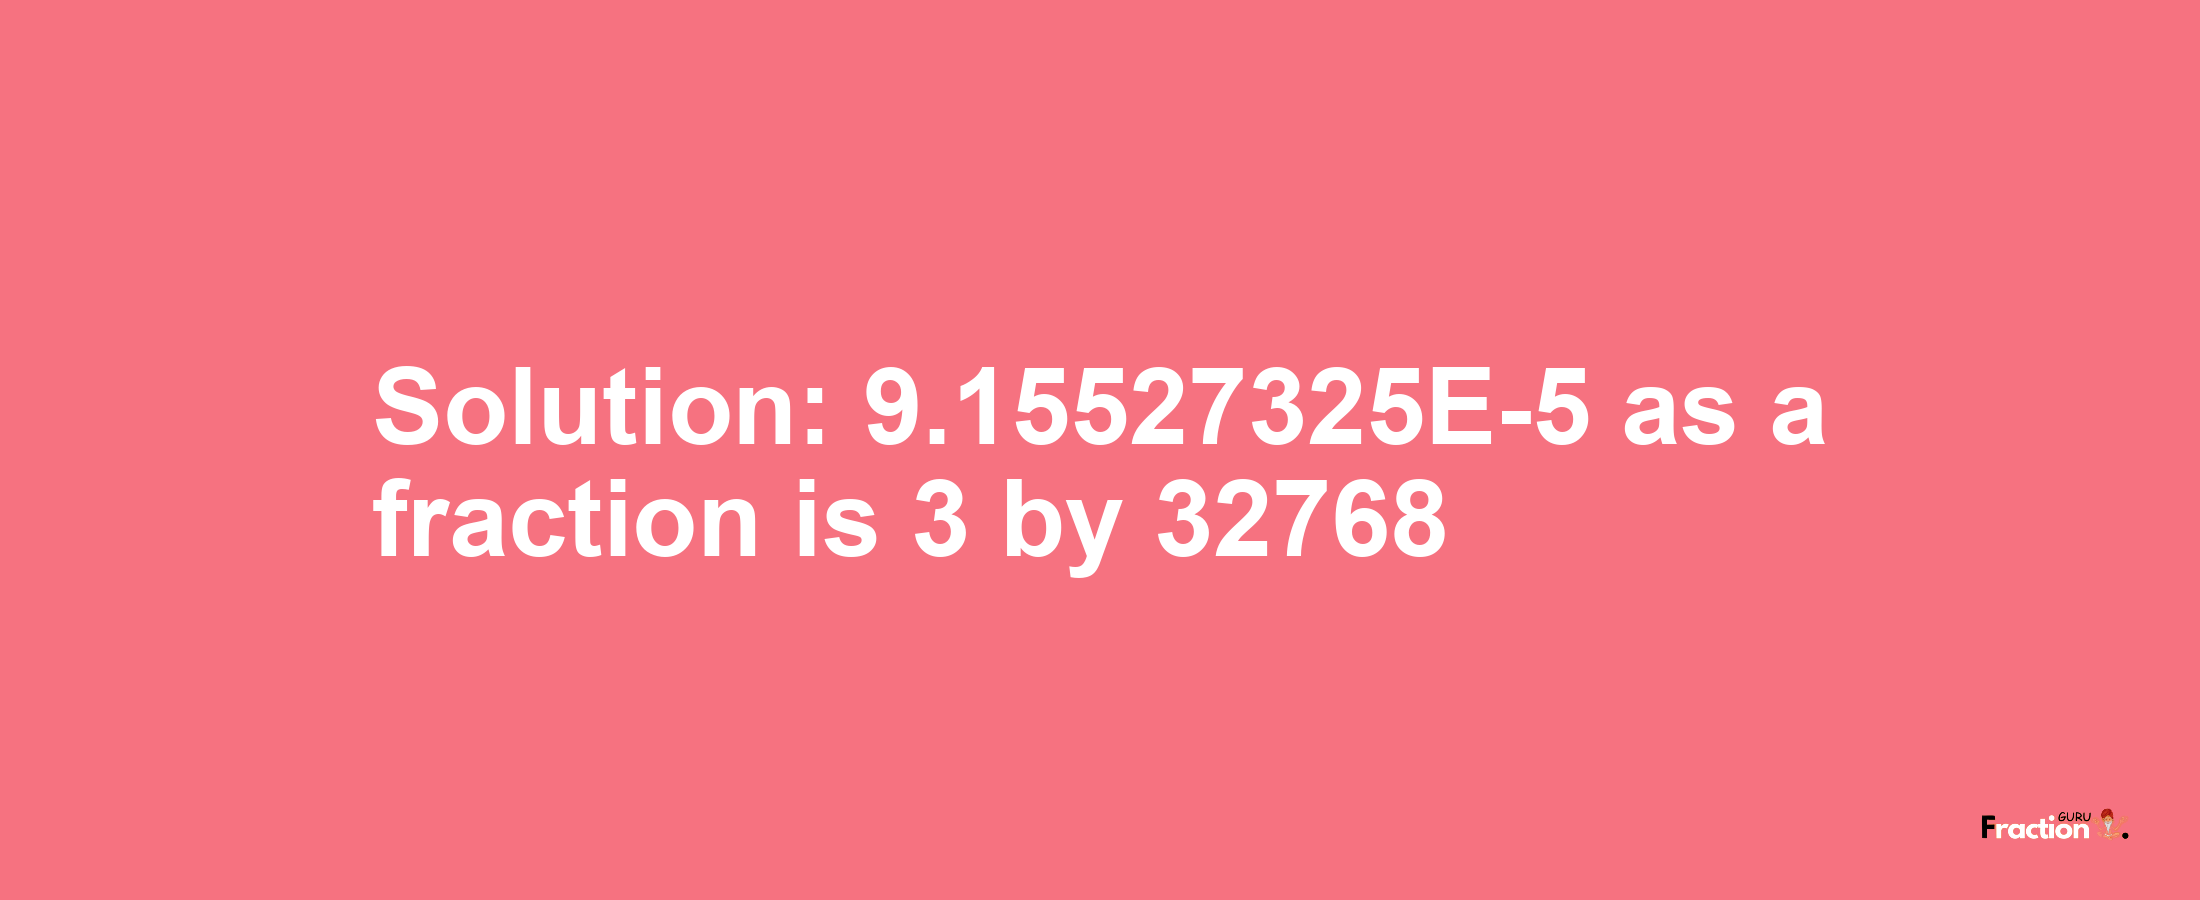 Solution:9.15527325E-5 as a fraction is 3/32768